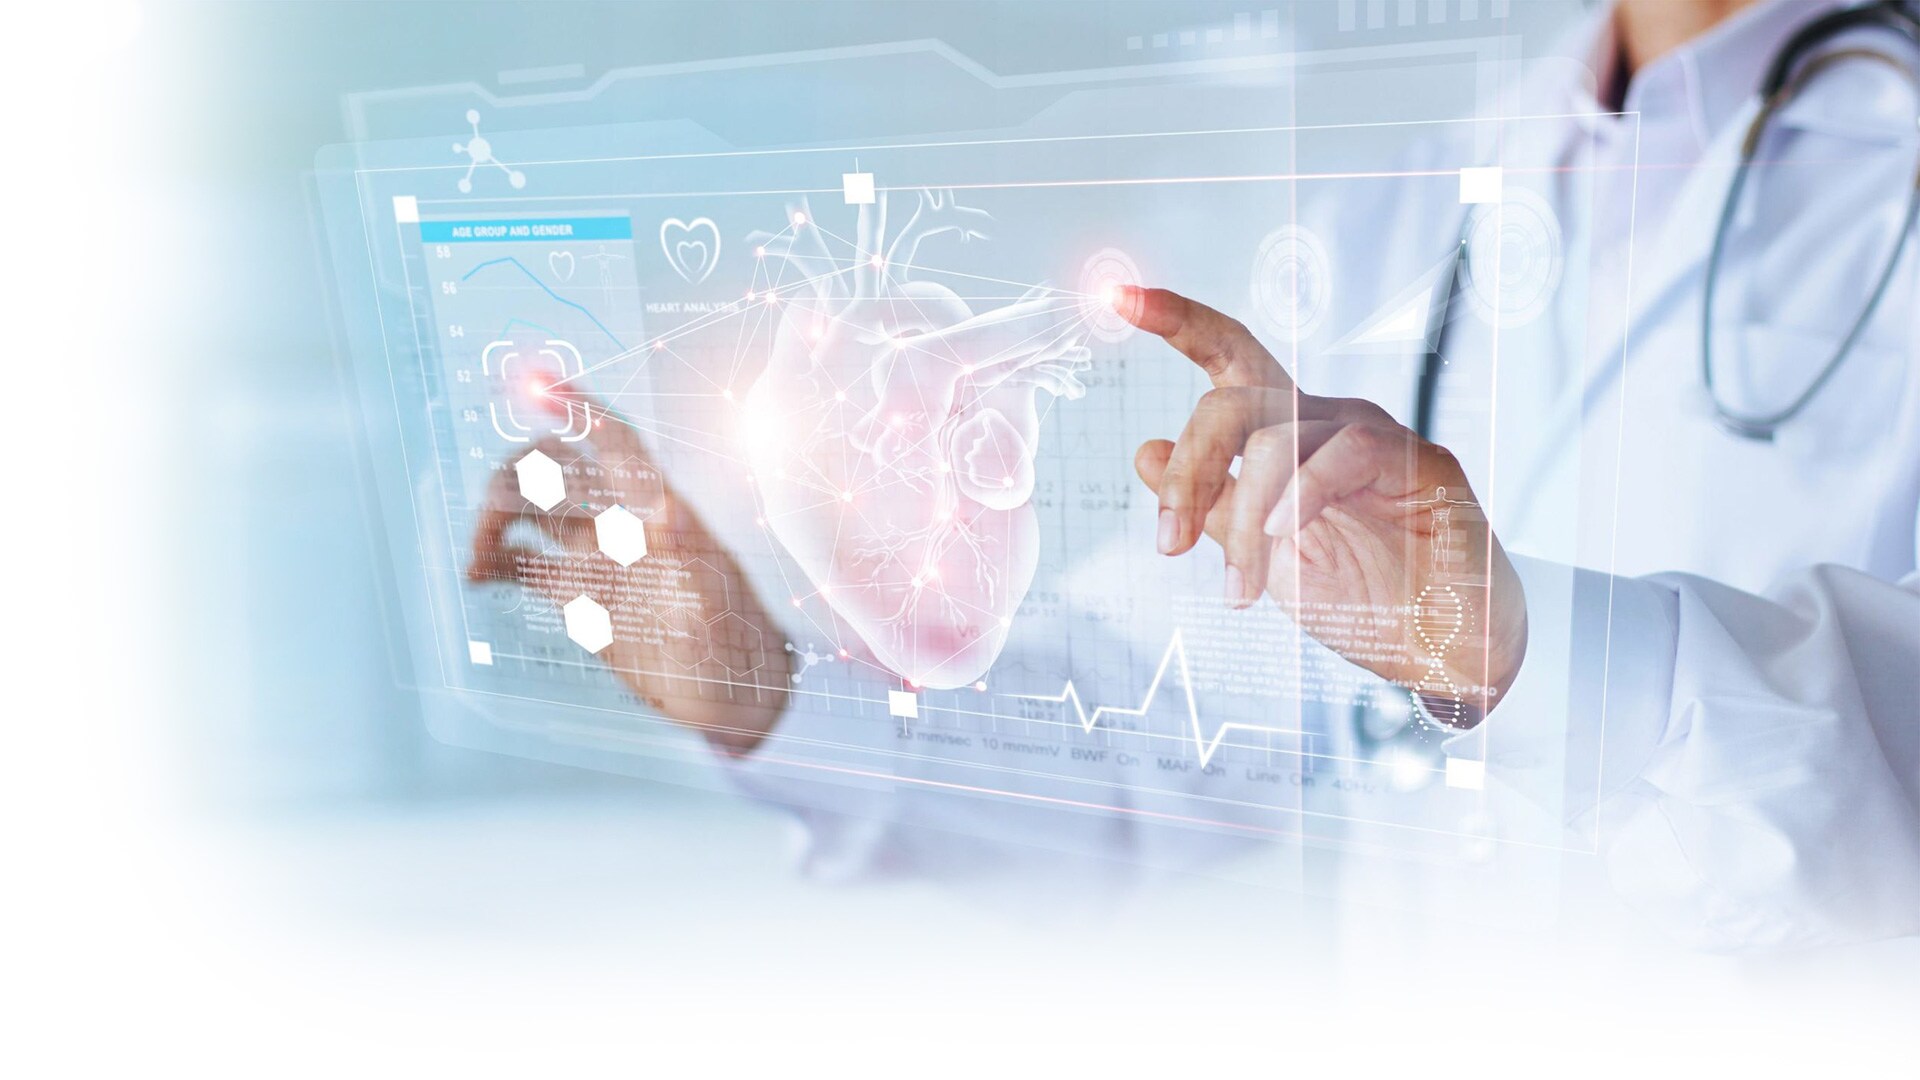 Reimagine the future of healthcare with Philips at Arab Health 2021